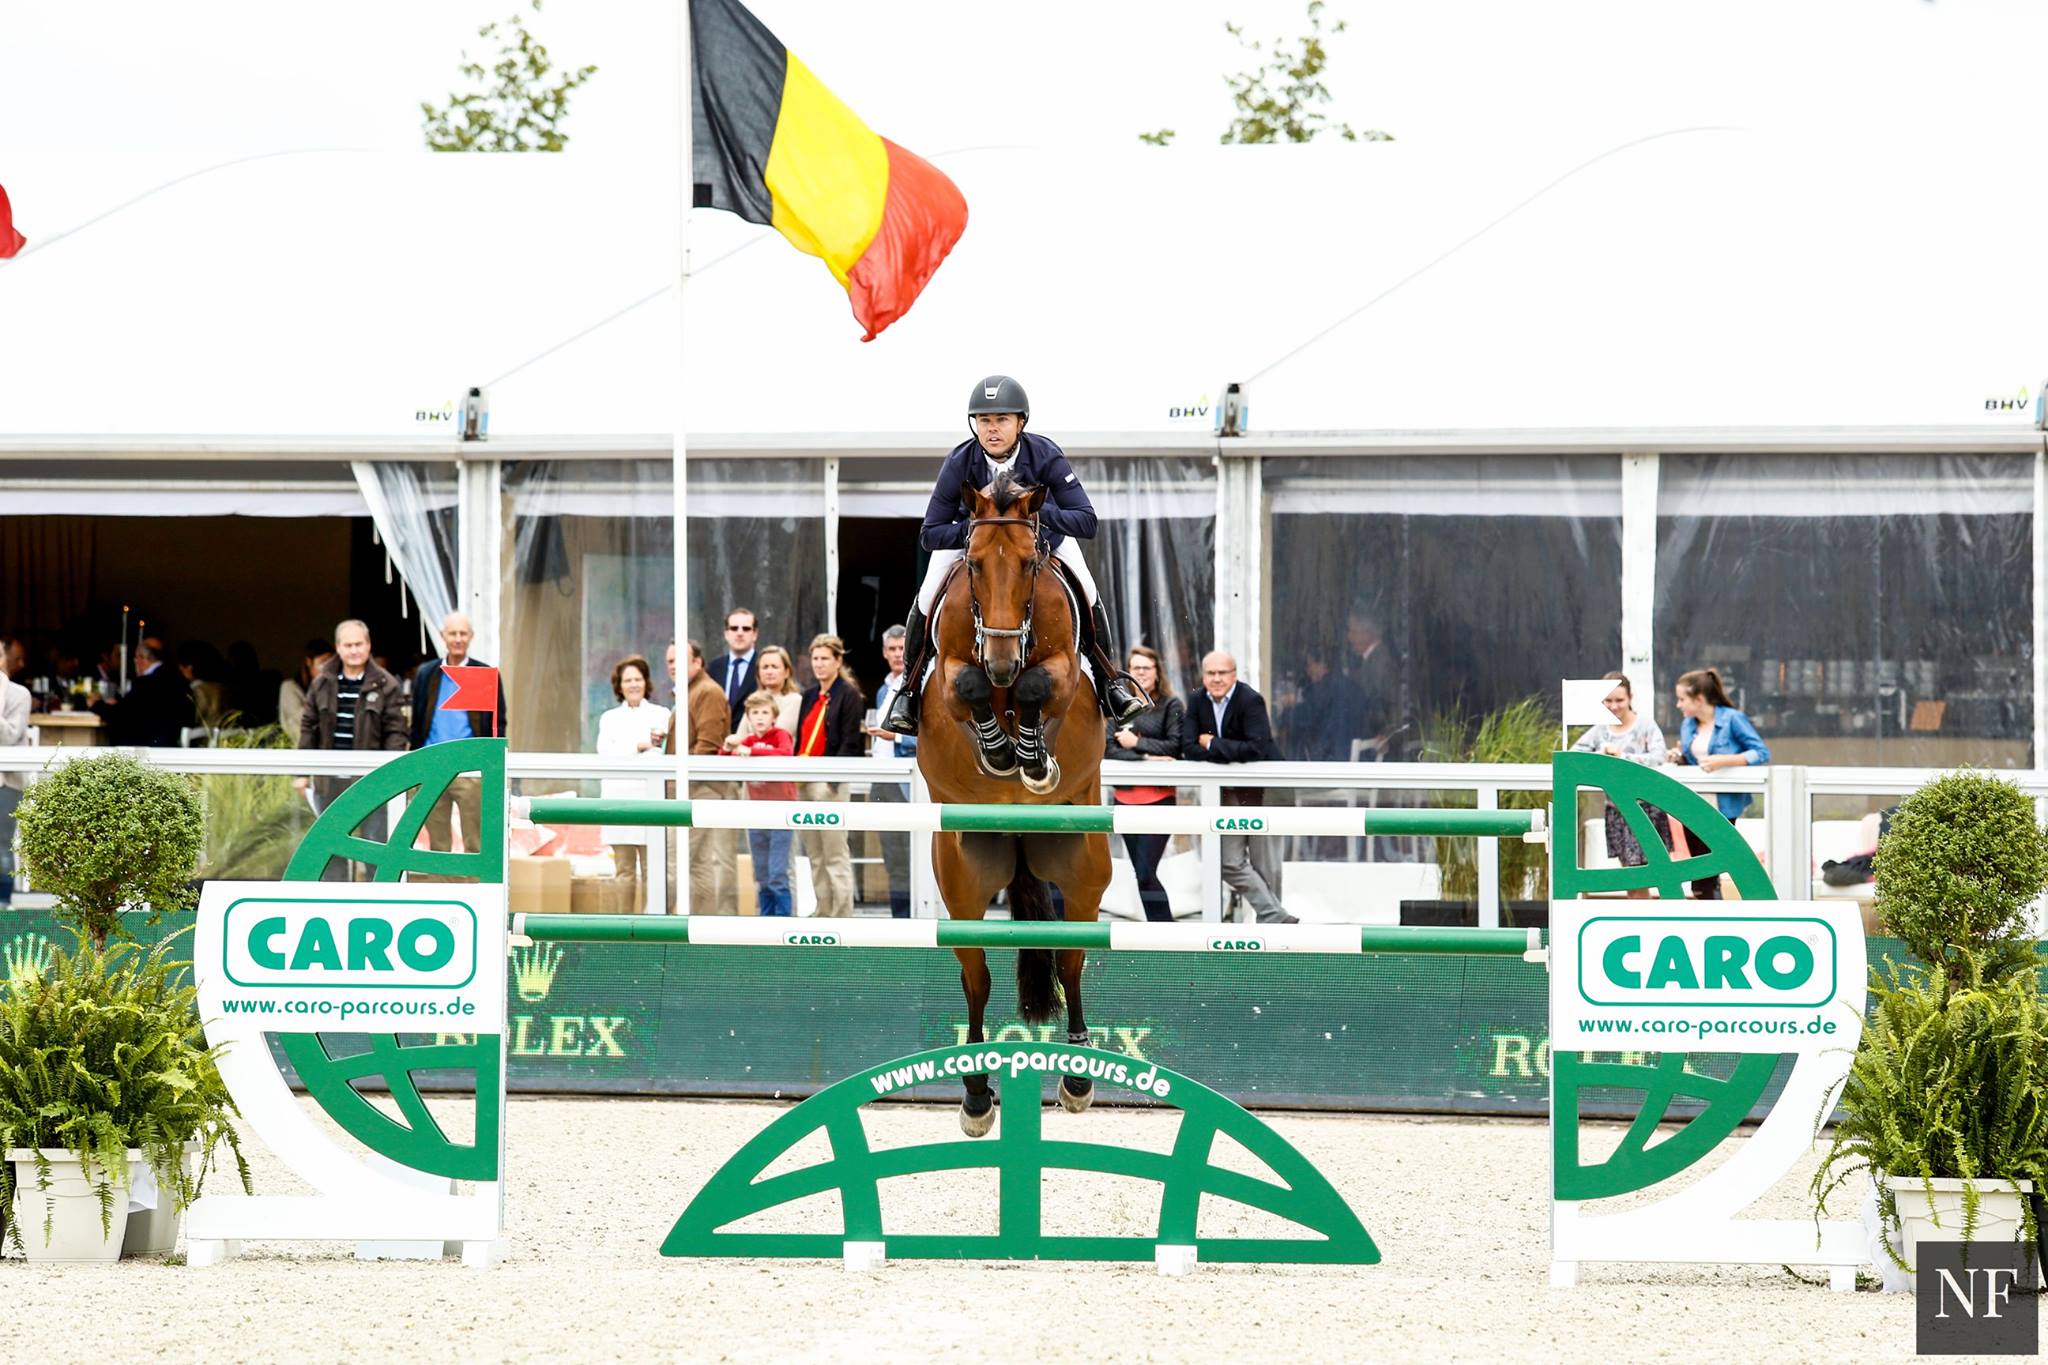 Shell Walker-Cook on location for Three Day Event at CARO INTERNATIONAL GRAND PRIX SPRING 2015 on course with USEF Phenom Kent Farrington and USEF Summer Olympic Equestrians Rio Bound 2016